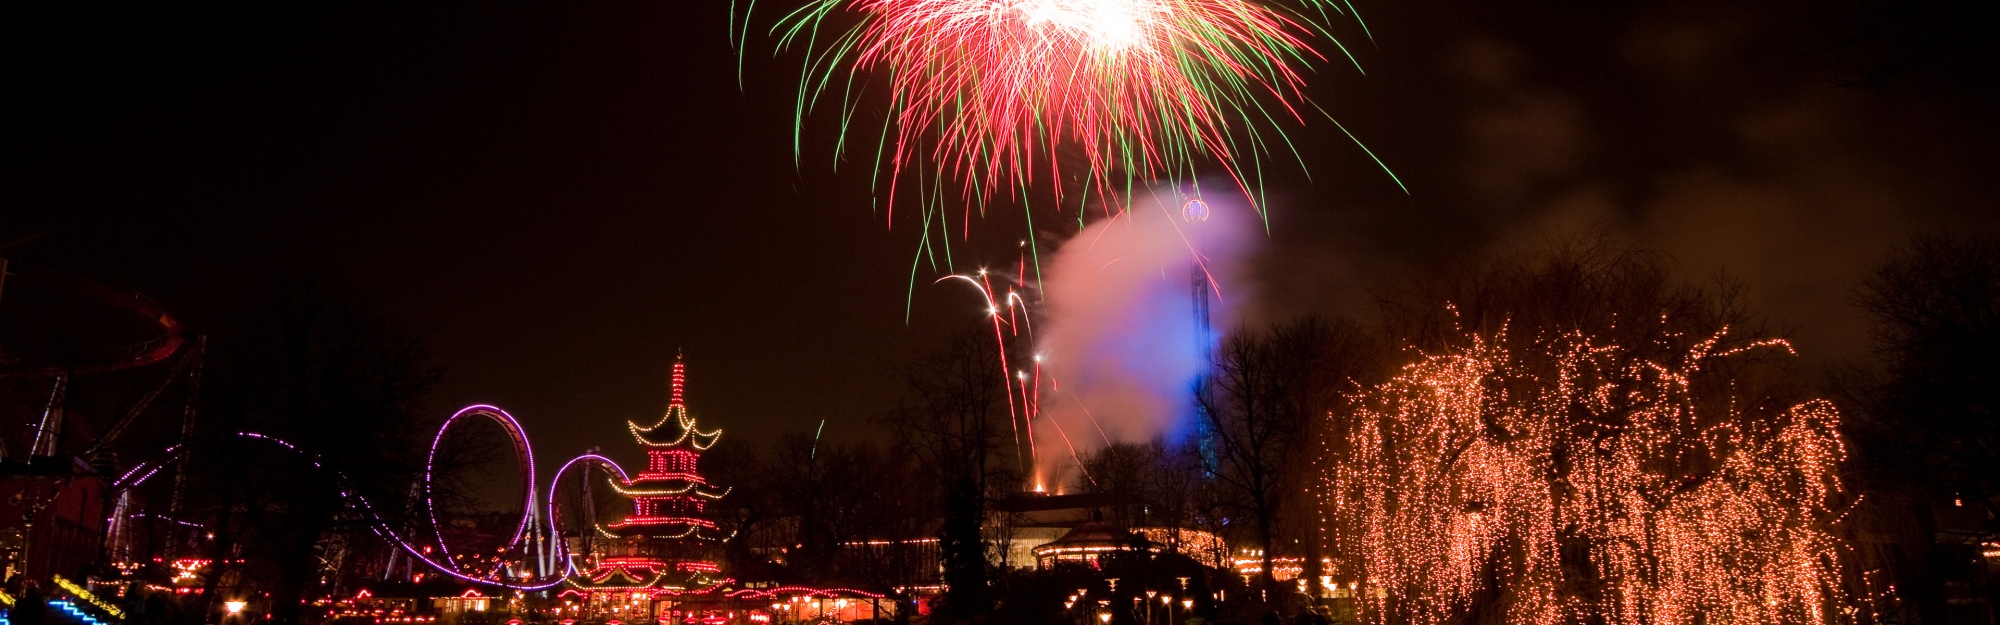 Colorful Fireworks For The Holidays